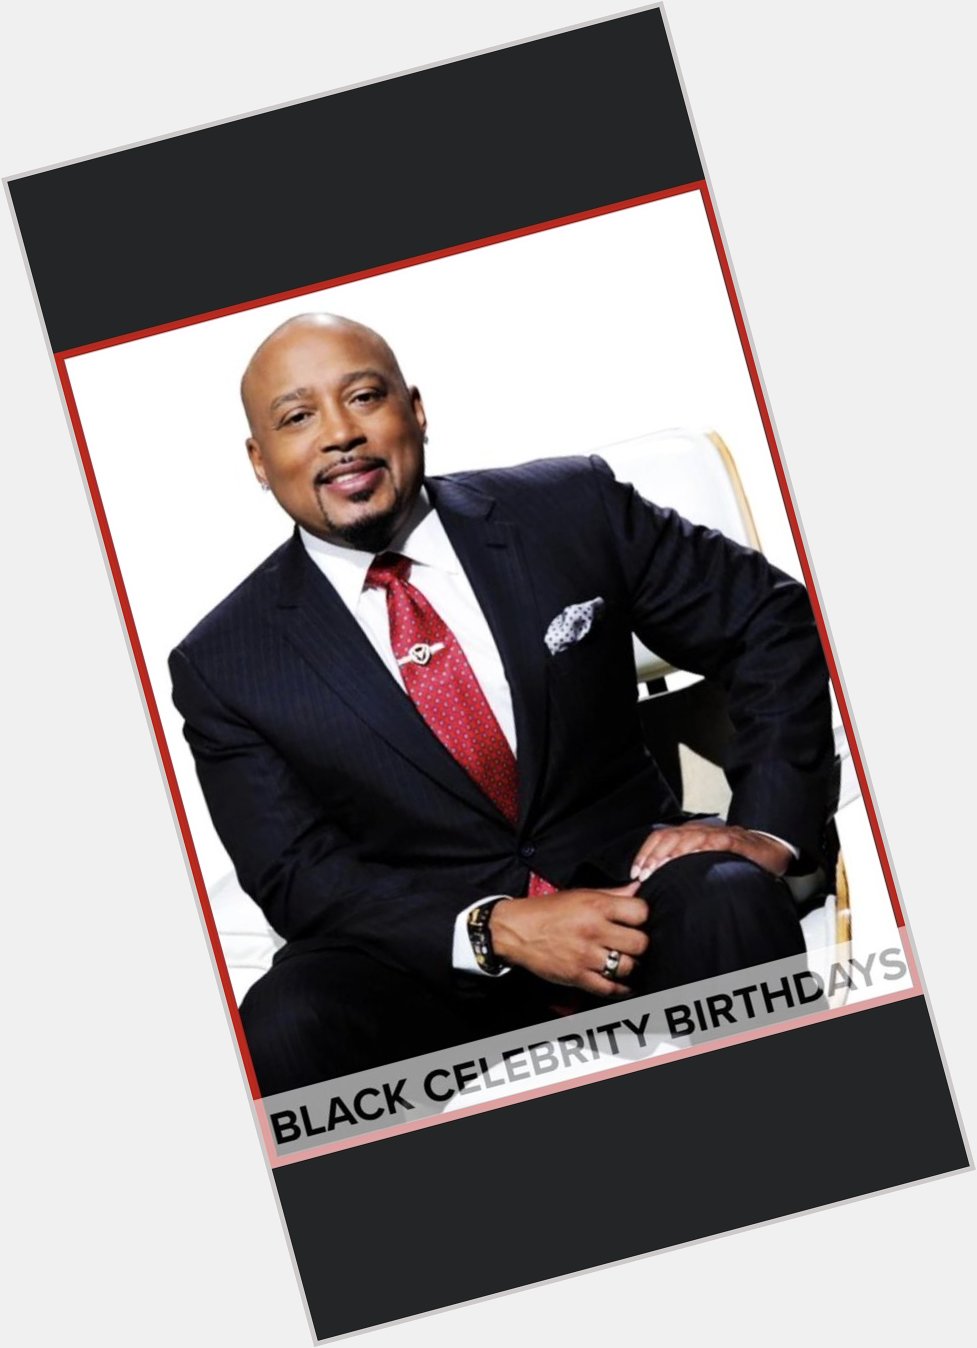 A couple days late Feb 23, but Happy Birthday Daymond John-businessman, investor,Television Personality. 